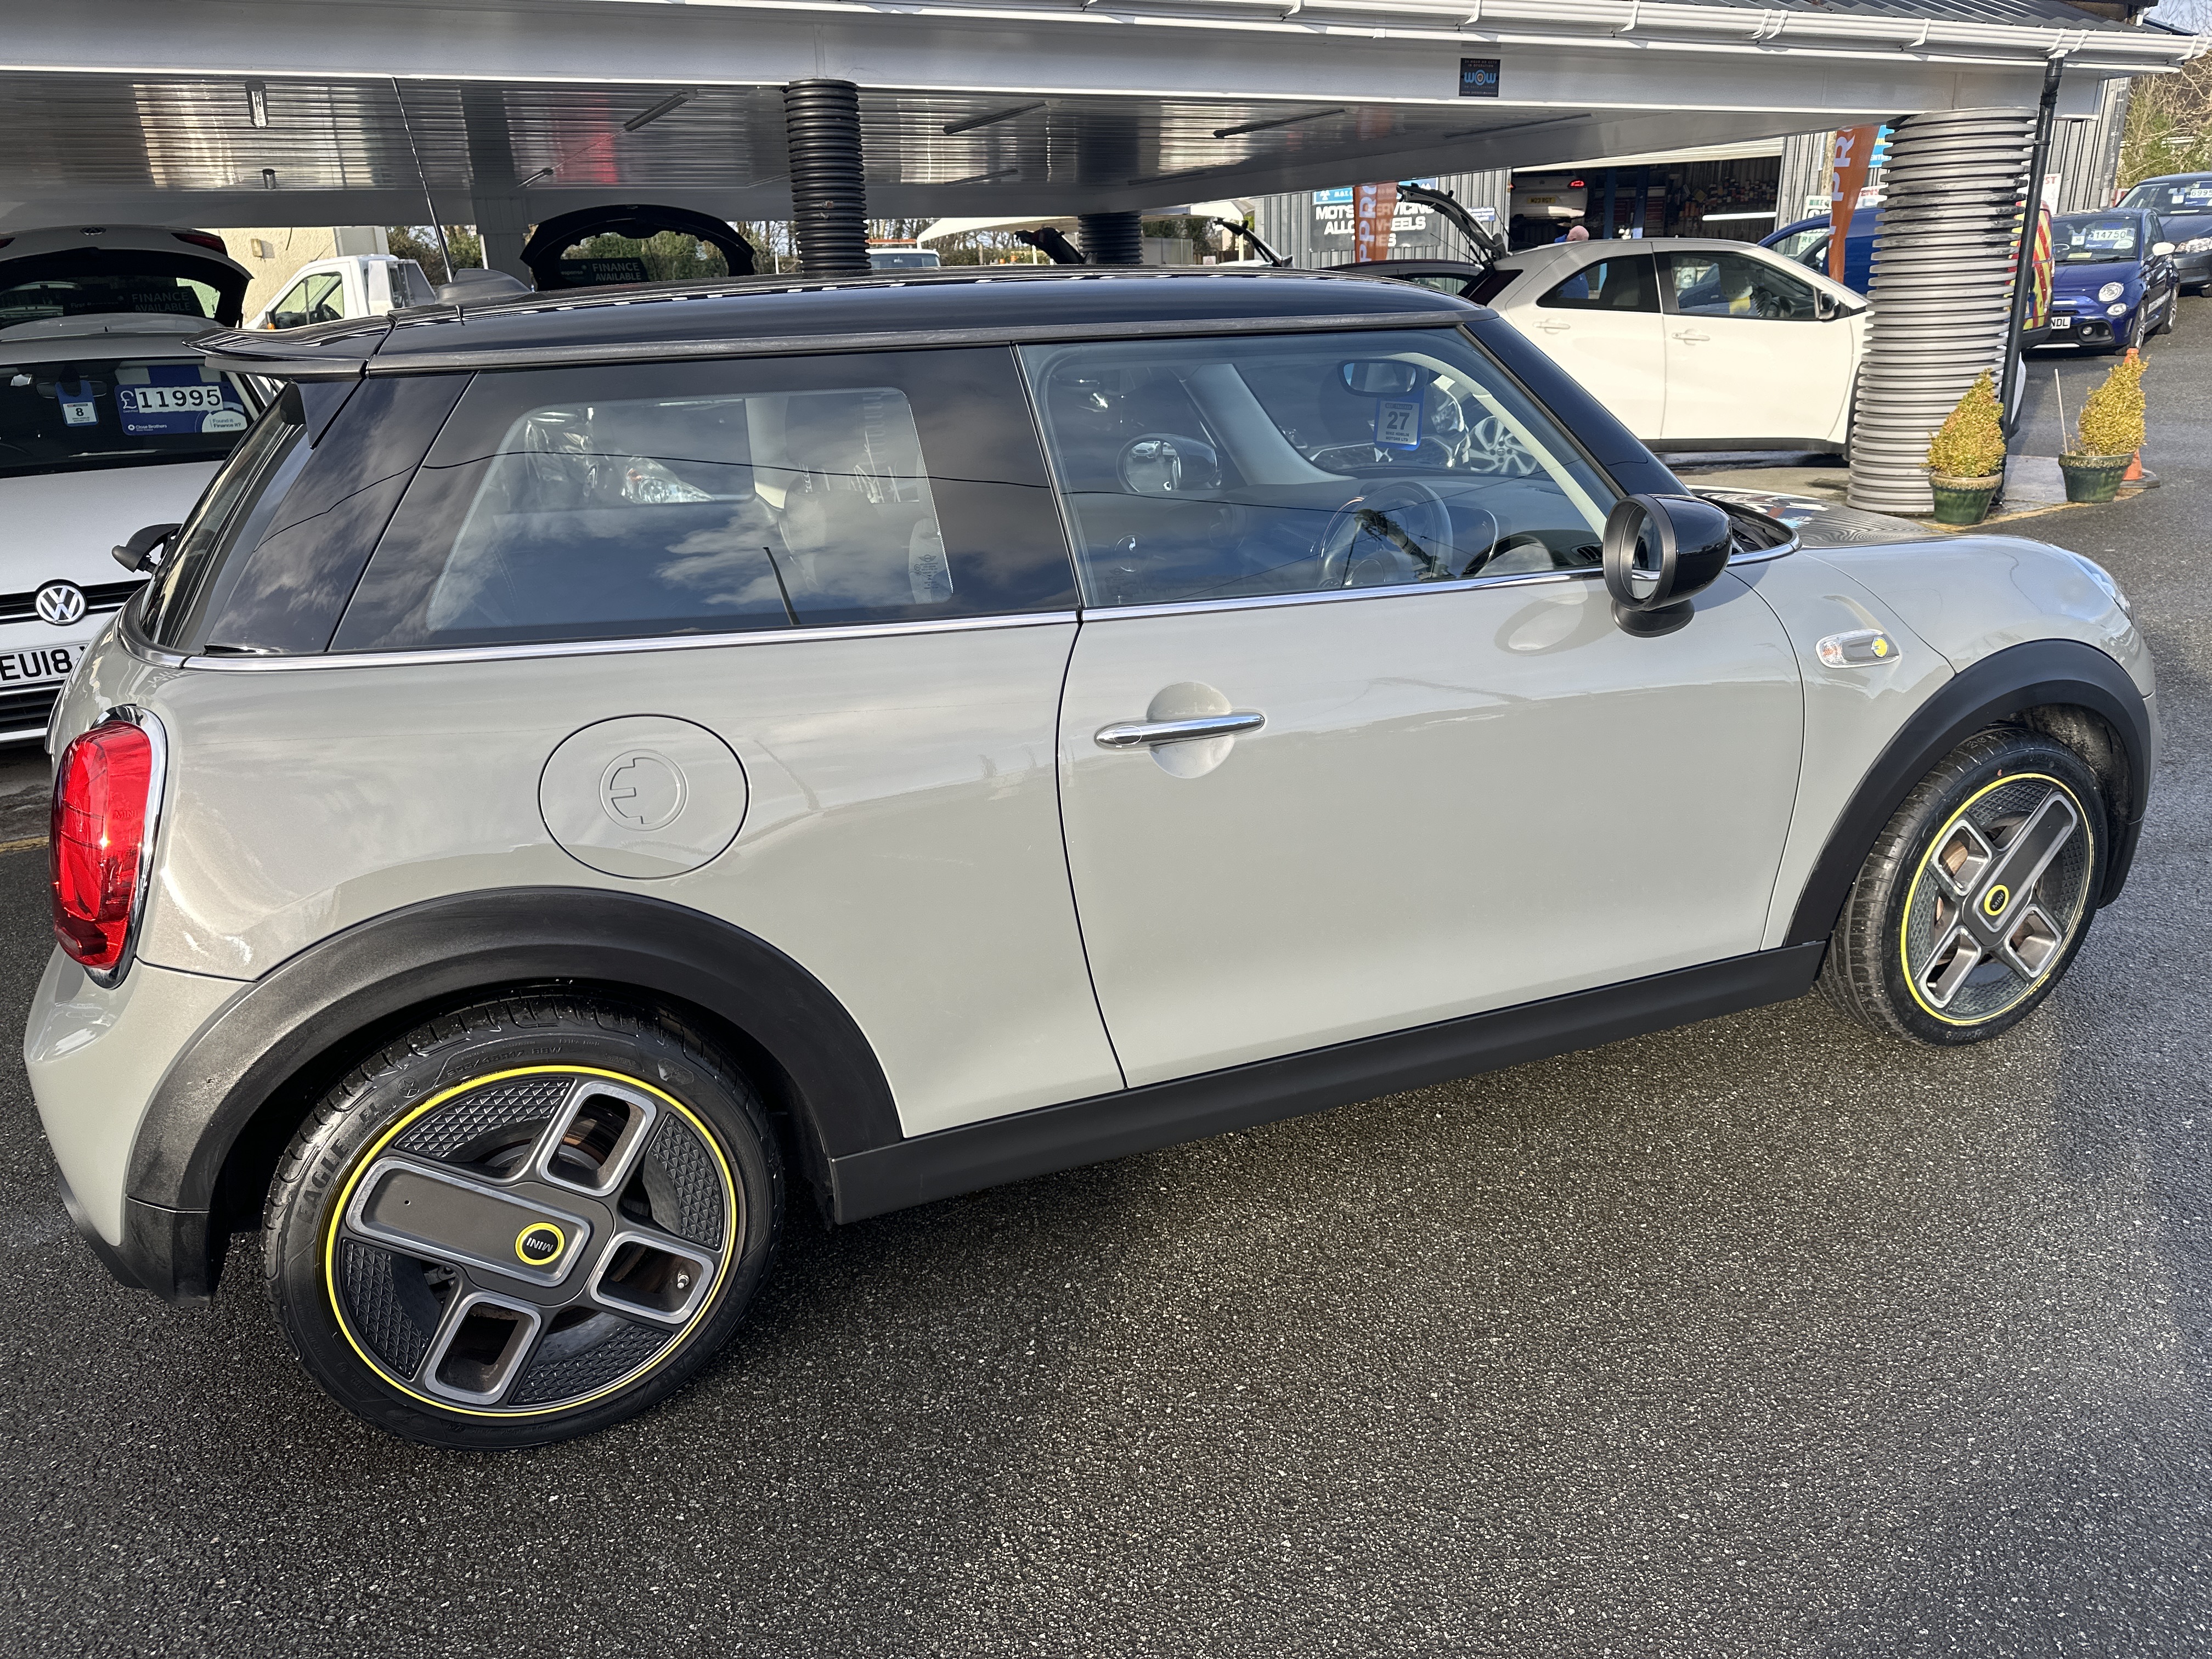 Mini COOPER S ELECTRIC LEVEL 1  for sale at Mike Howlin Motor Sales Pembrokeshire